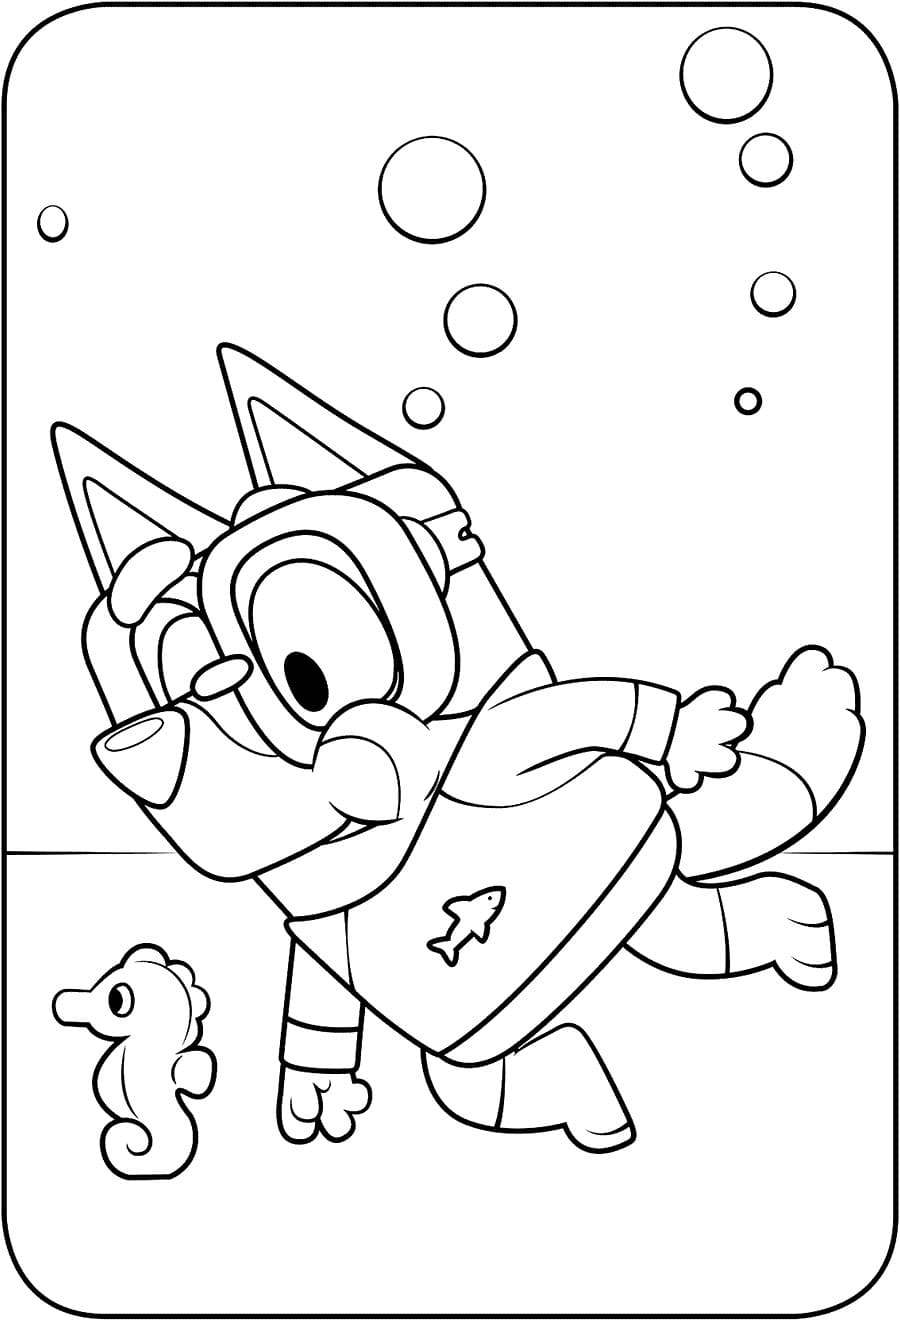 Bluey coloring pages. Print or download for free WONDER DAY